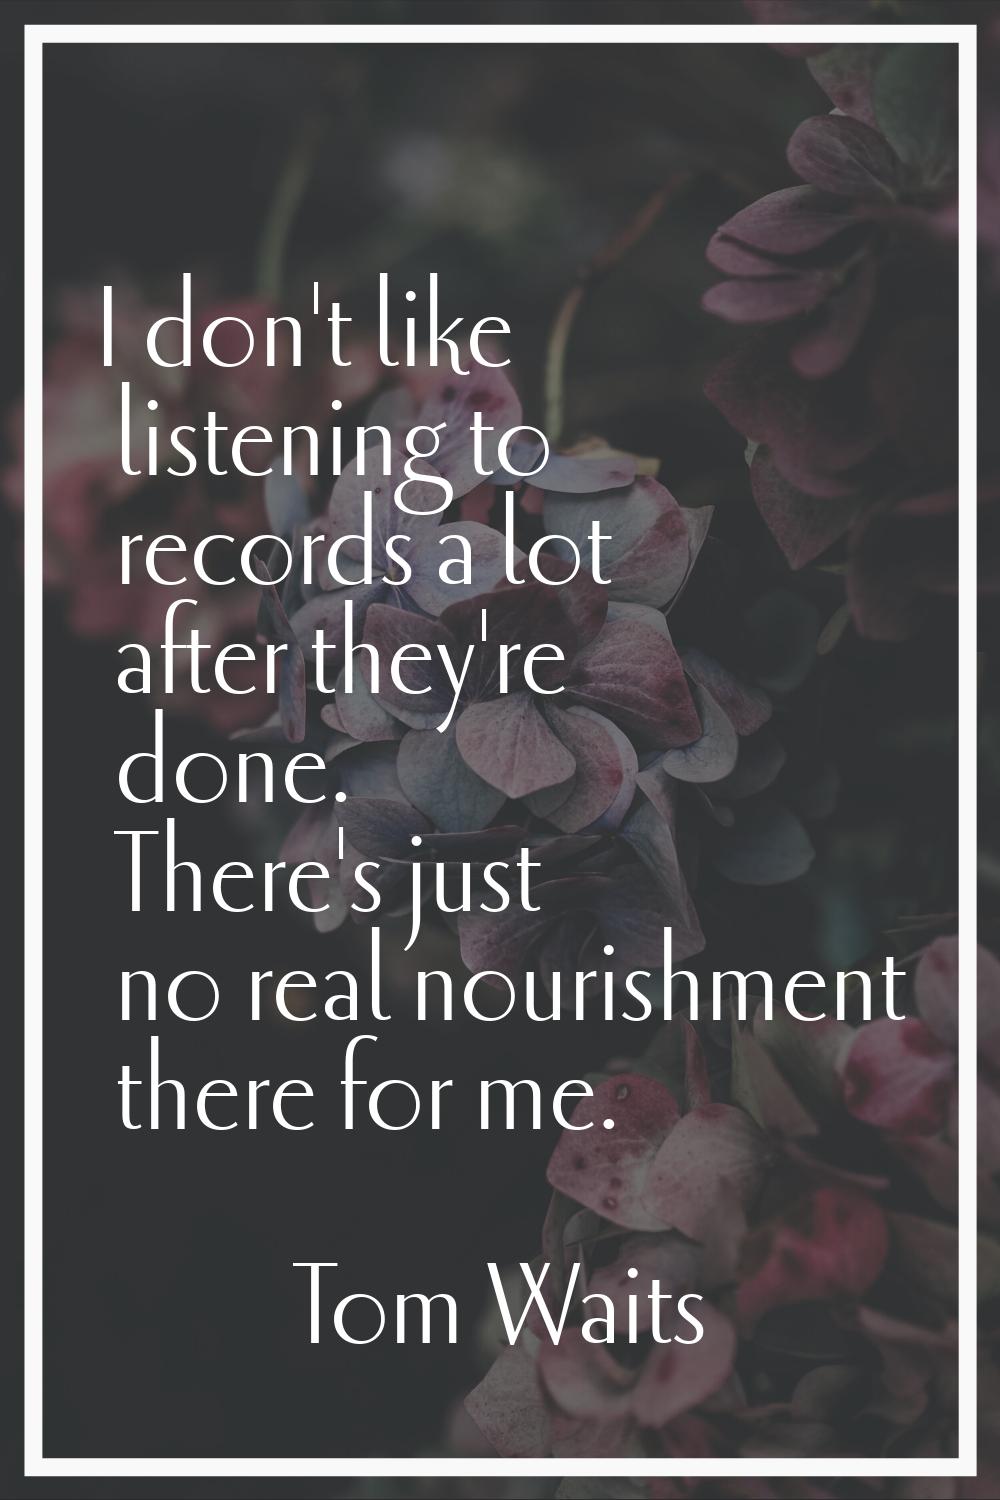 I don't like listening to records a lot after they're done. There's just no real nourishment there 